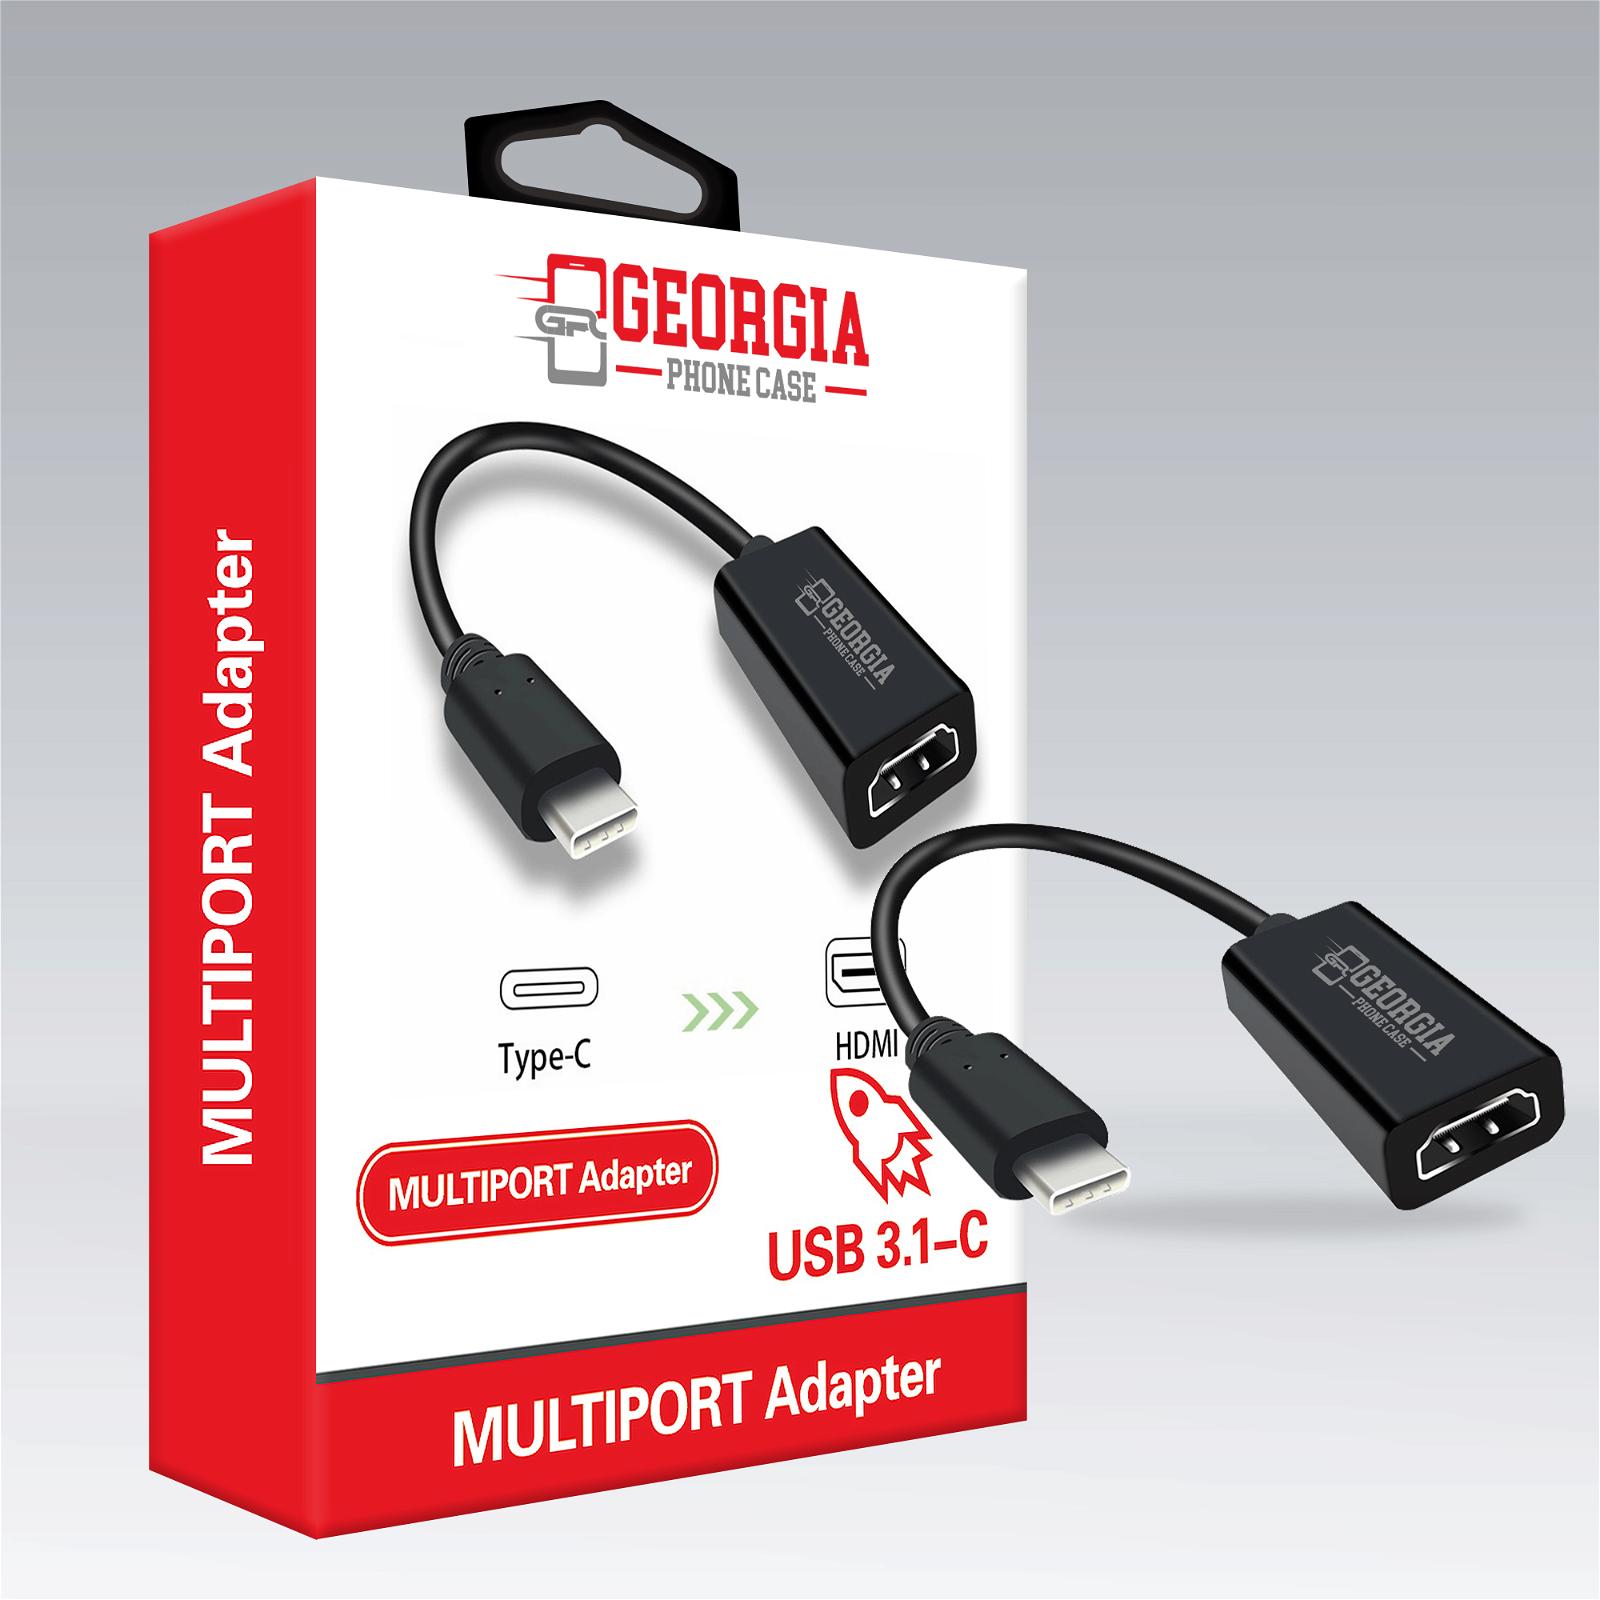 D342 – USB-C Type C to HDMI Adapter USB 3.1 Cable For MHL Android